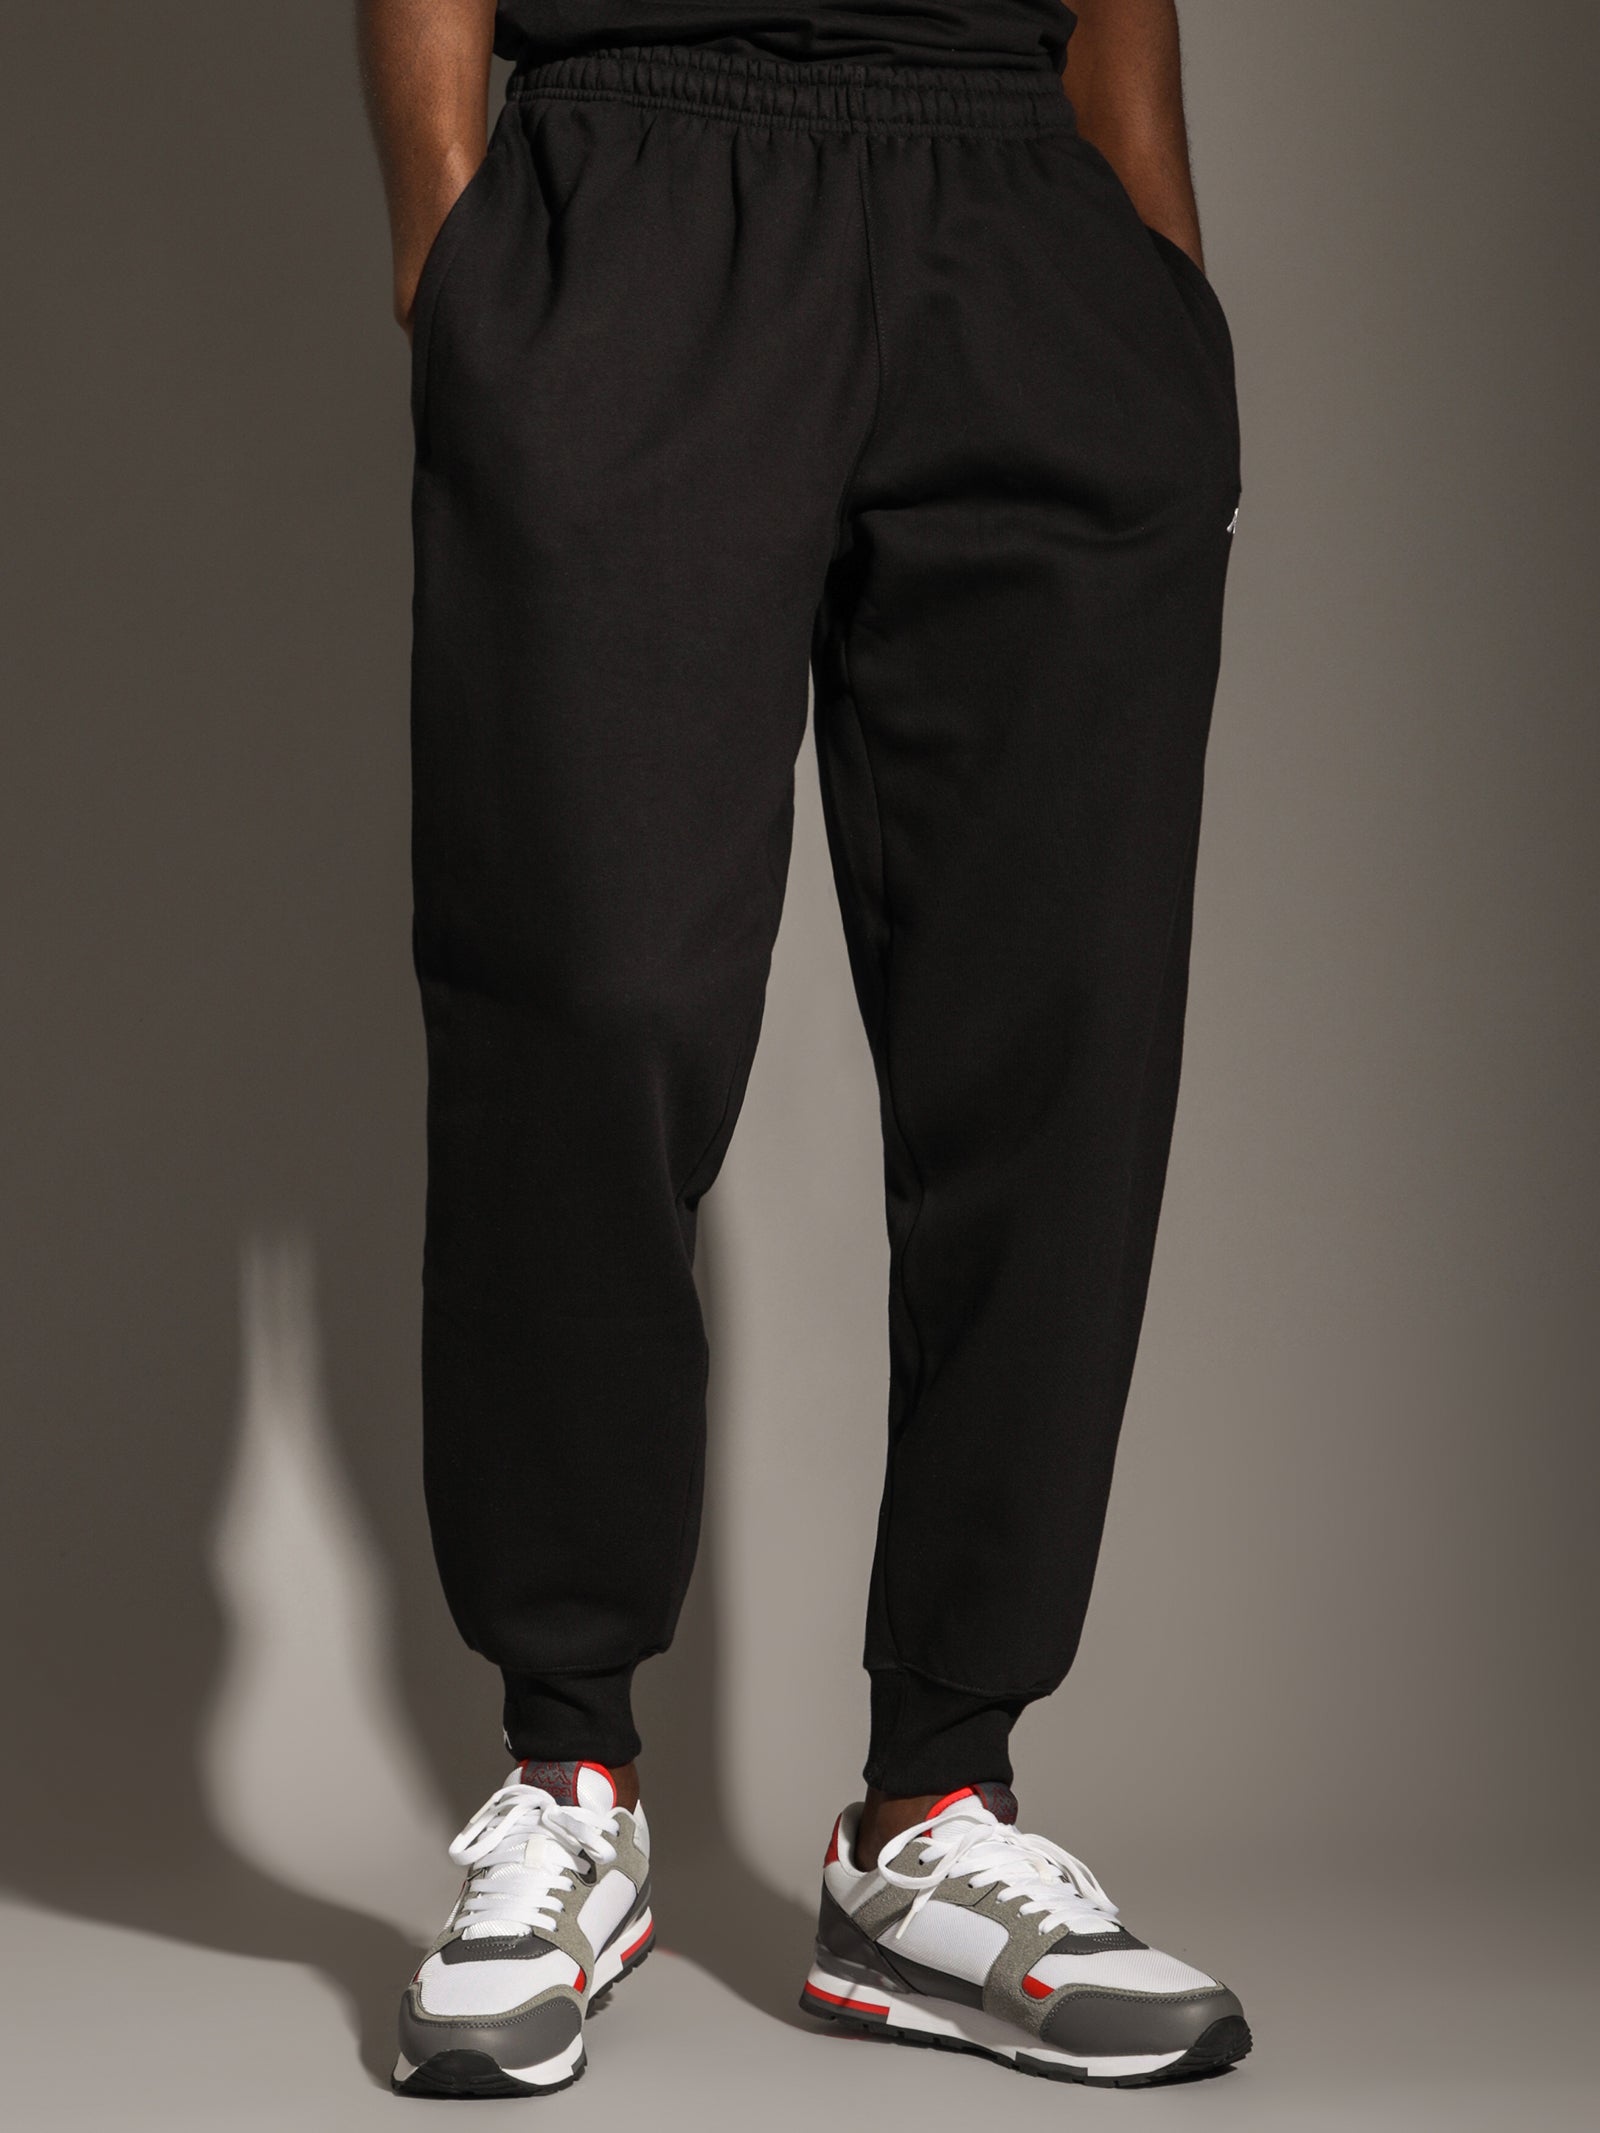 Authentic Scar Track Pants in Black - Glue Store